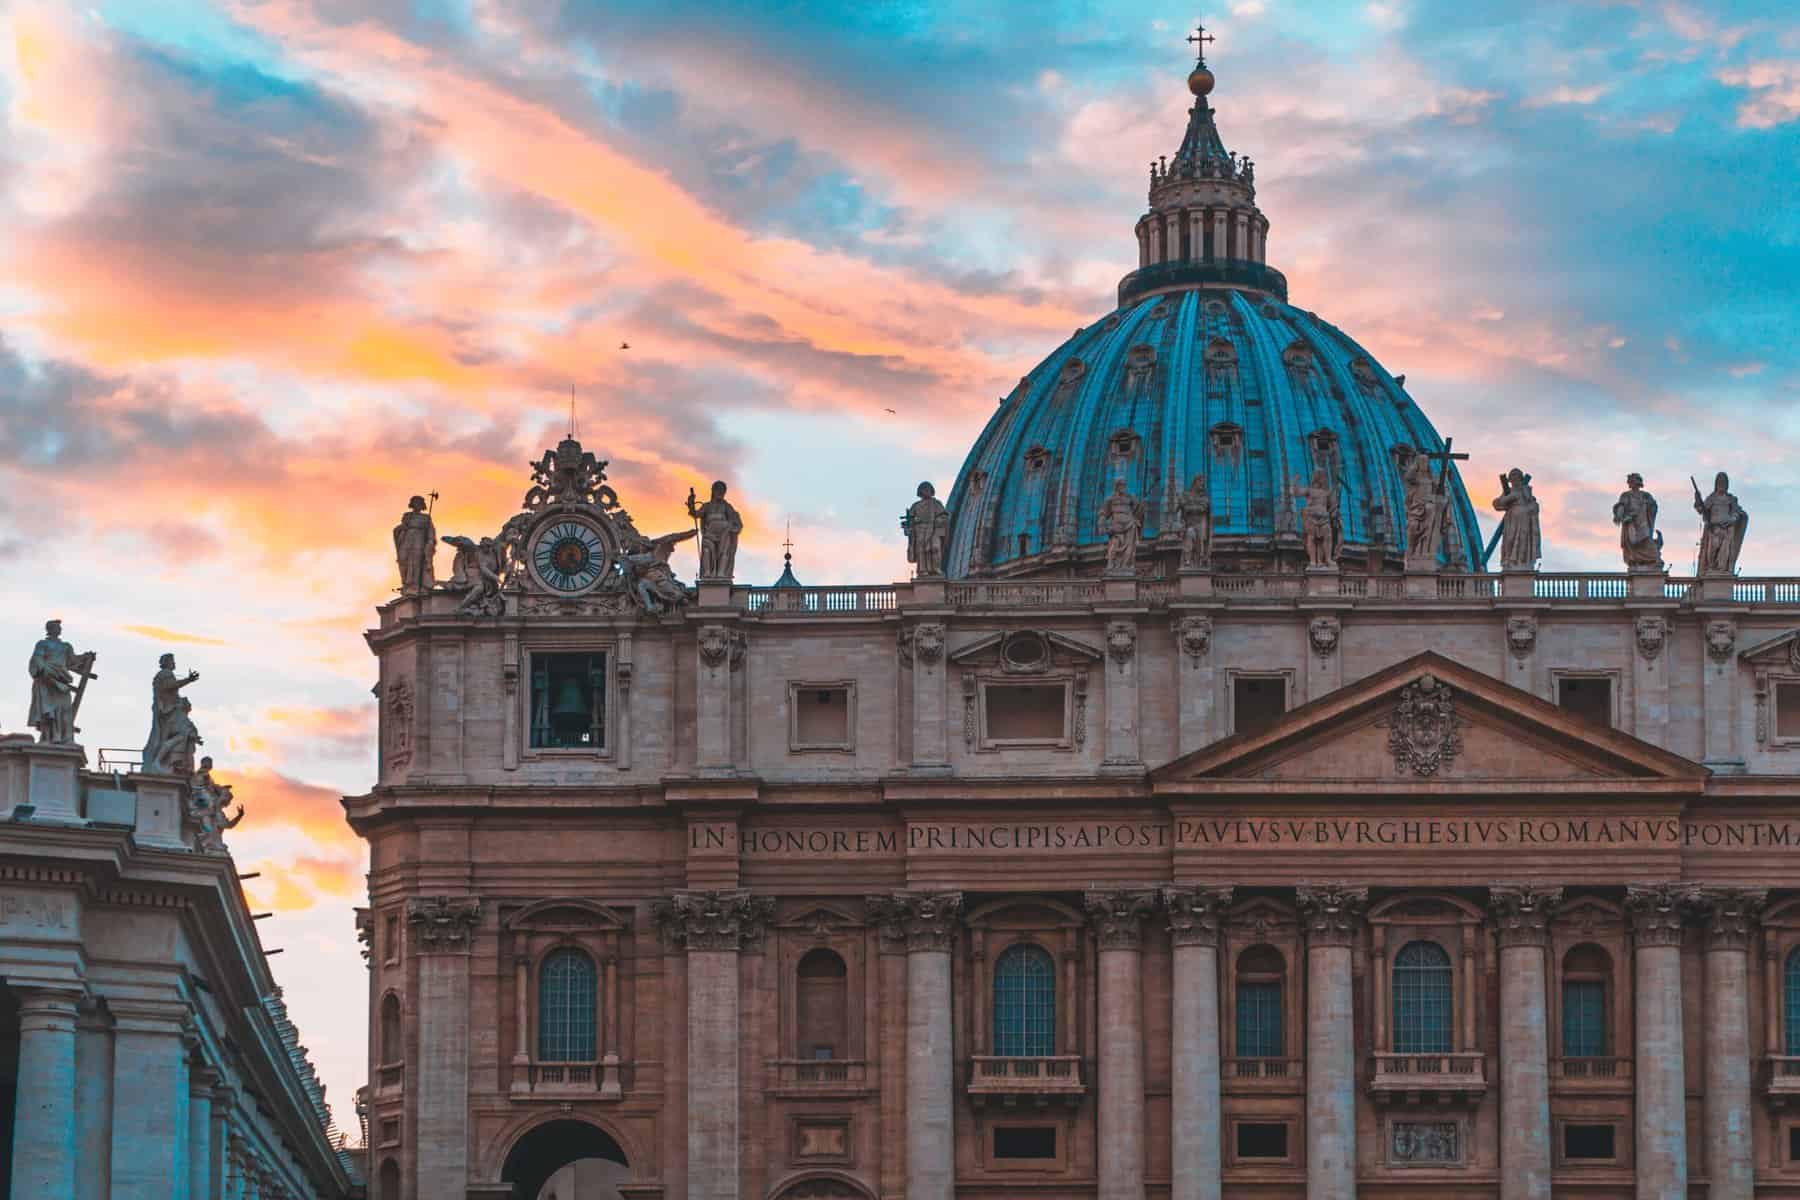 Famous St. Peter's Basilica in Vatican City and the sky with beautiful colors behind